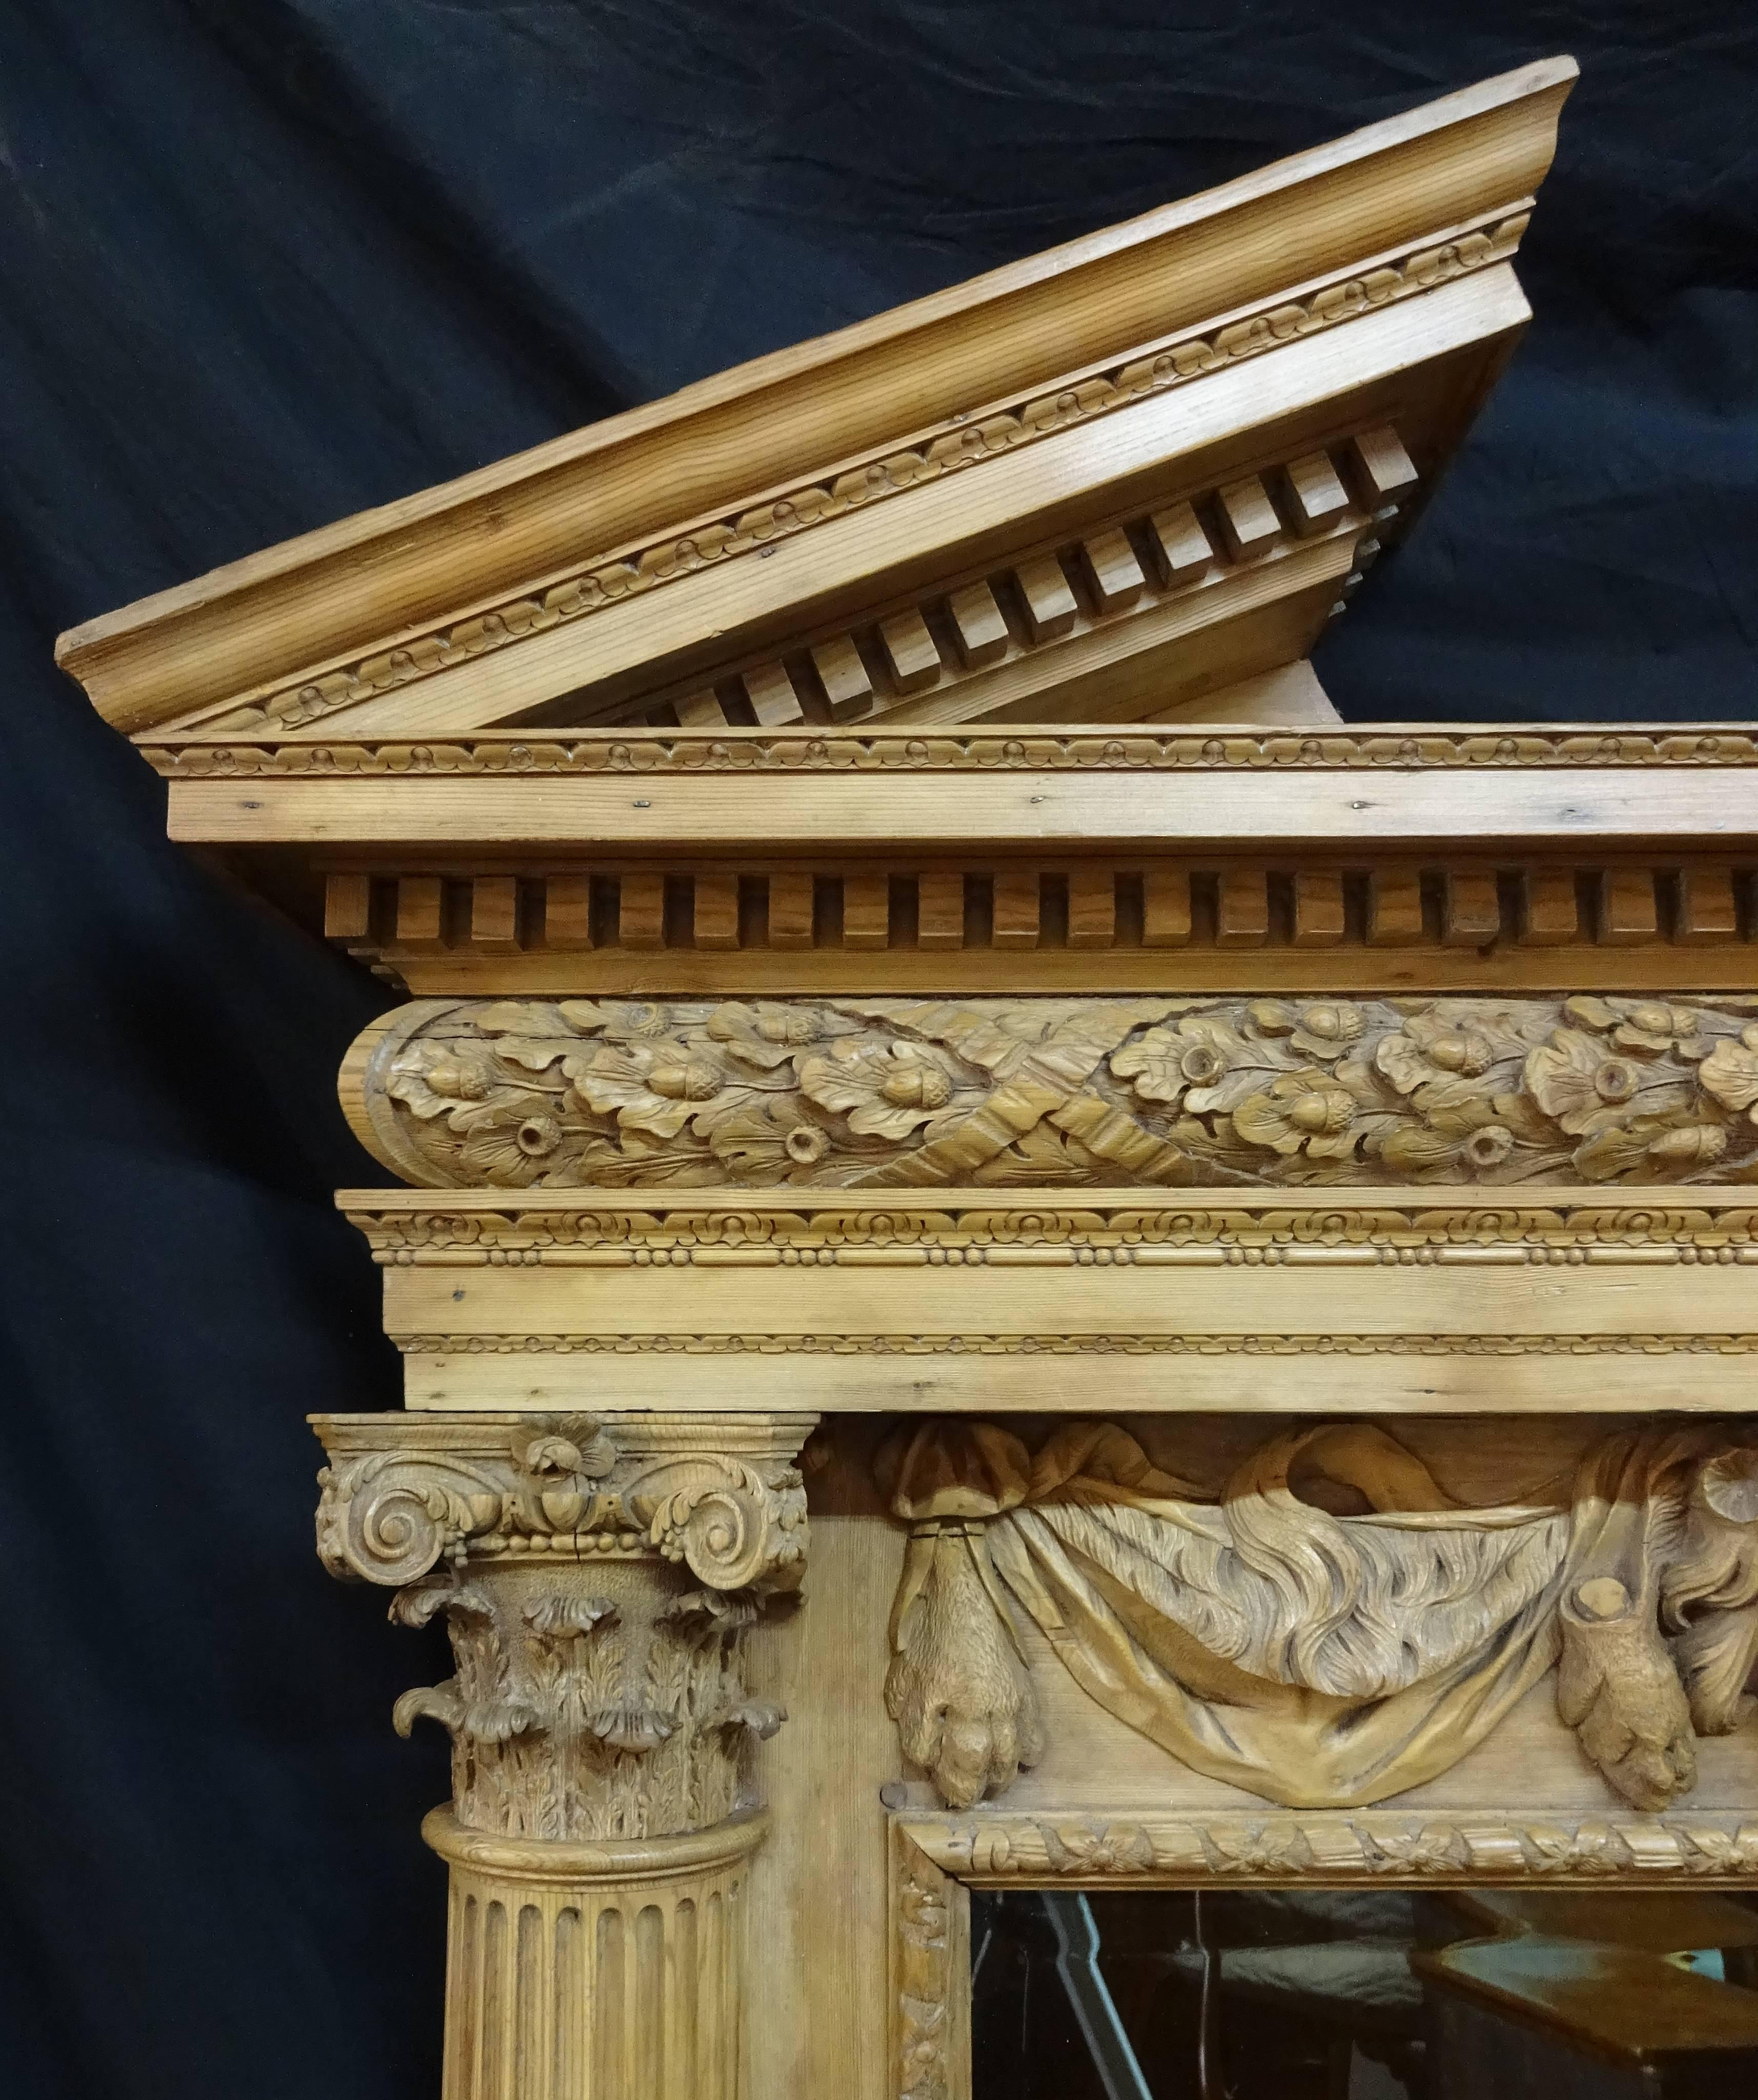 Attributed to Francis and John Booker after a design by William Jones.
The Palladian broken arch pediment with dentil carved molding above a cushion form frieze finely carved with acorn leaves; the original (re-silvered) beveled mirror plate set